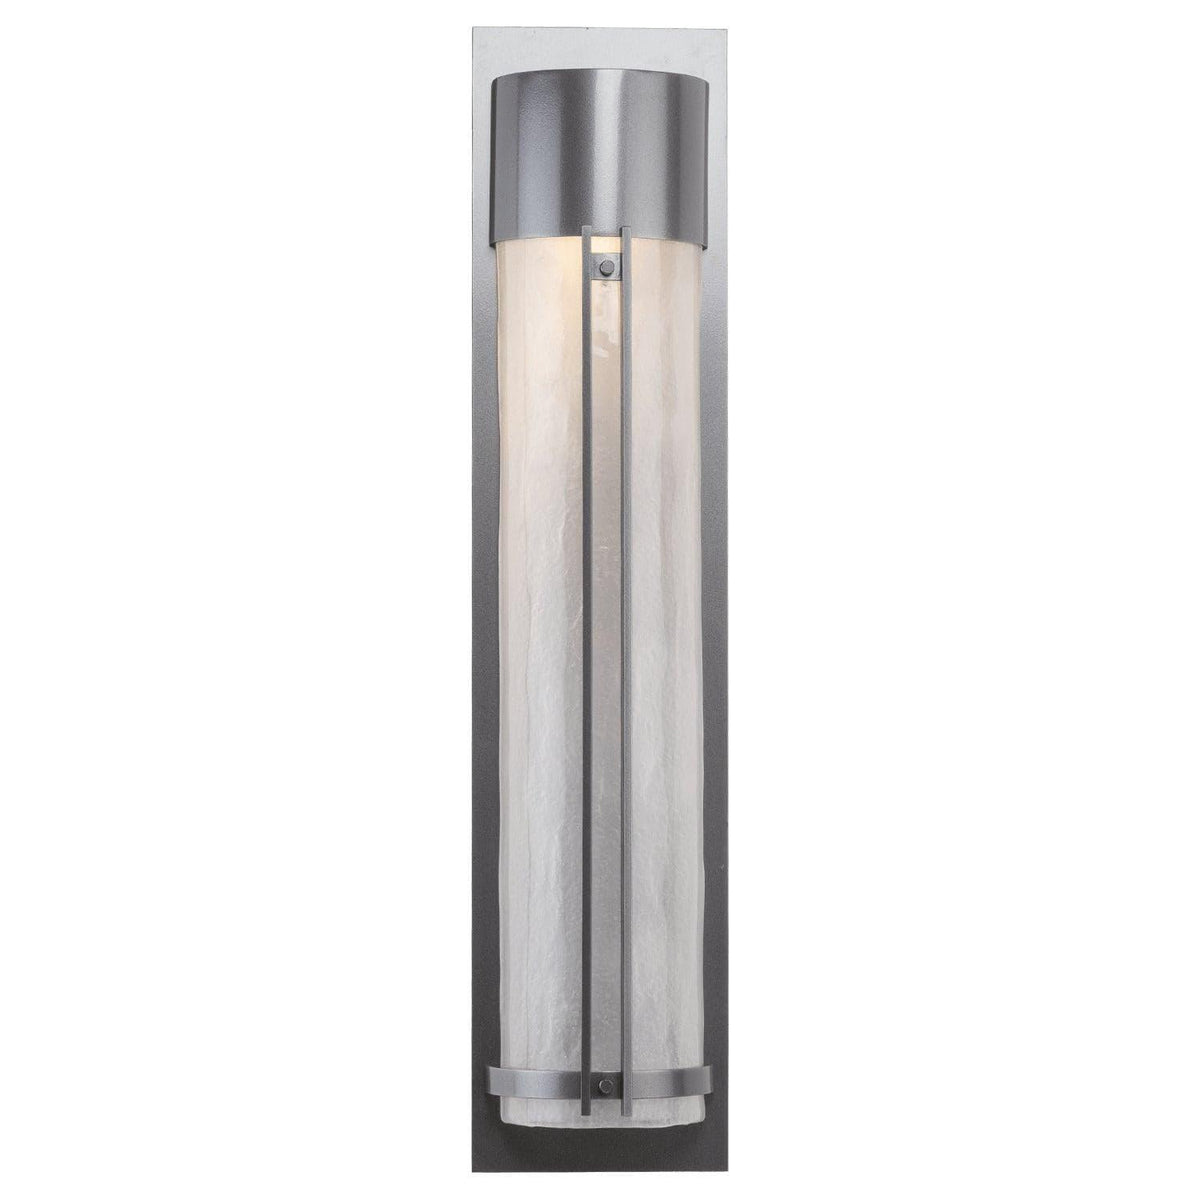 Hammerton Studio - Outdoor Tall Round Cover Sconce with Metalwork - ODB0054-31-AG-FG-L2 | Montreal Lighting & Hardware